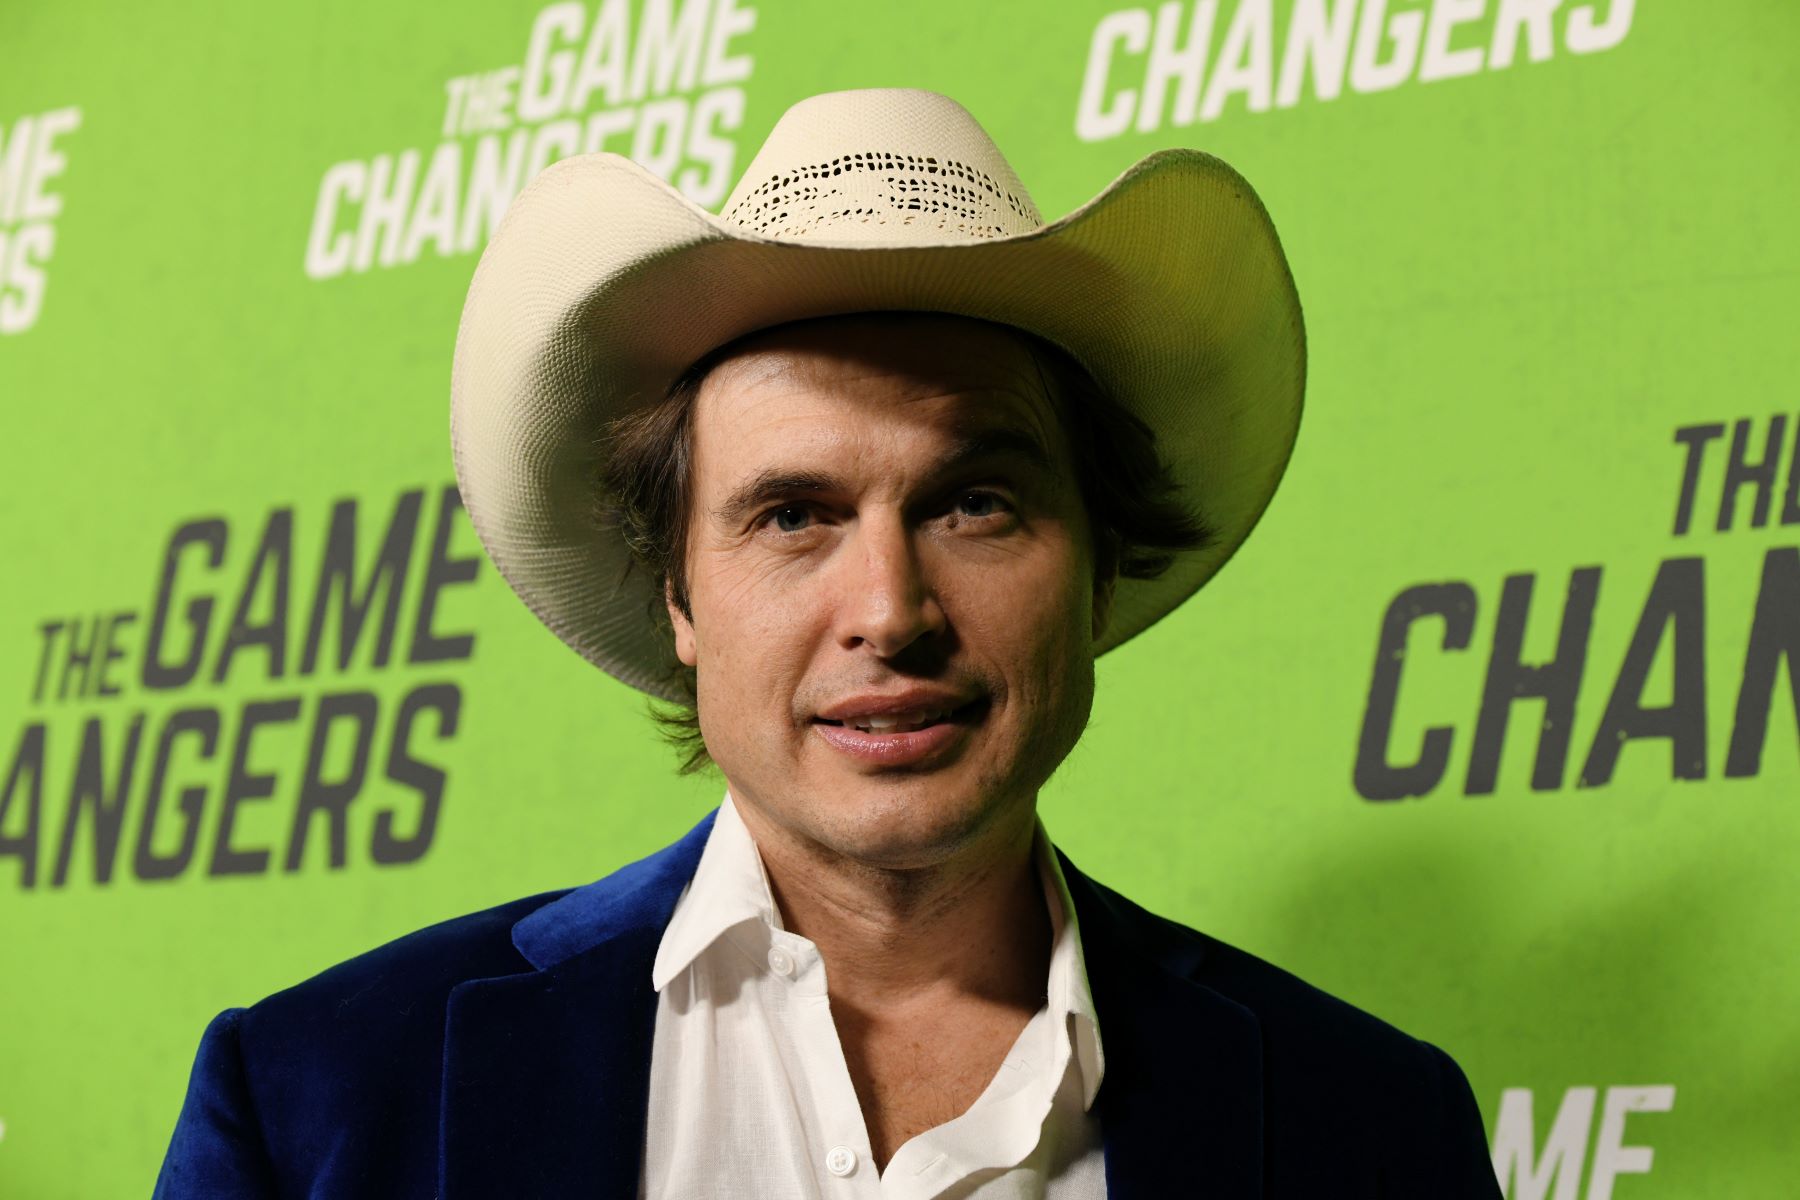 Chef Kimbal Musk’s Net Worth Is Staggering but Pales in Comparison to Brother Elon Musk’s Fortune